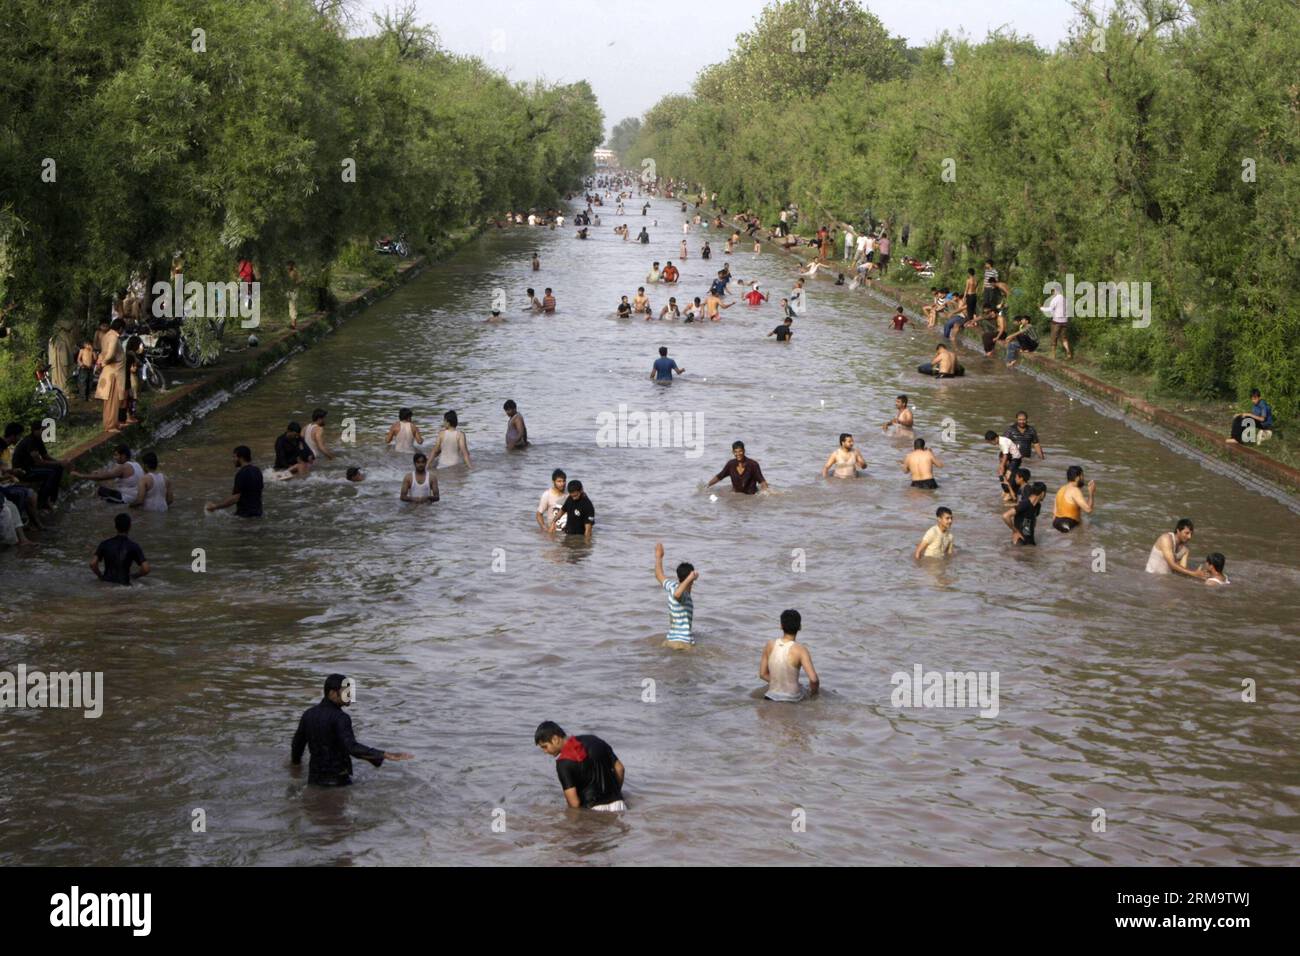 People swim in a canal to beat the heat as temperature rises over 40 degrees Celsius in eastern Pakistan s Lahore on June 2, 2014. (Xinhua/Jamil Ahmed) (zjy) PAKISTAN-LAHORE-TEMPERATURE PUBLICATIONxNOTxINxCHN   Celebrities Swim in a Canal to Beat The Heat As temperature Rises Over 40 Degrees Celsius in Eastern Pakistan S Lahore ON June 2 2014 XINHUA Jamil Ahmed  Pakistan Lahore temperature PUBLICATIONxNOTxINxCHN Stock Photo